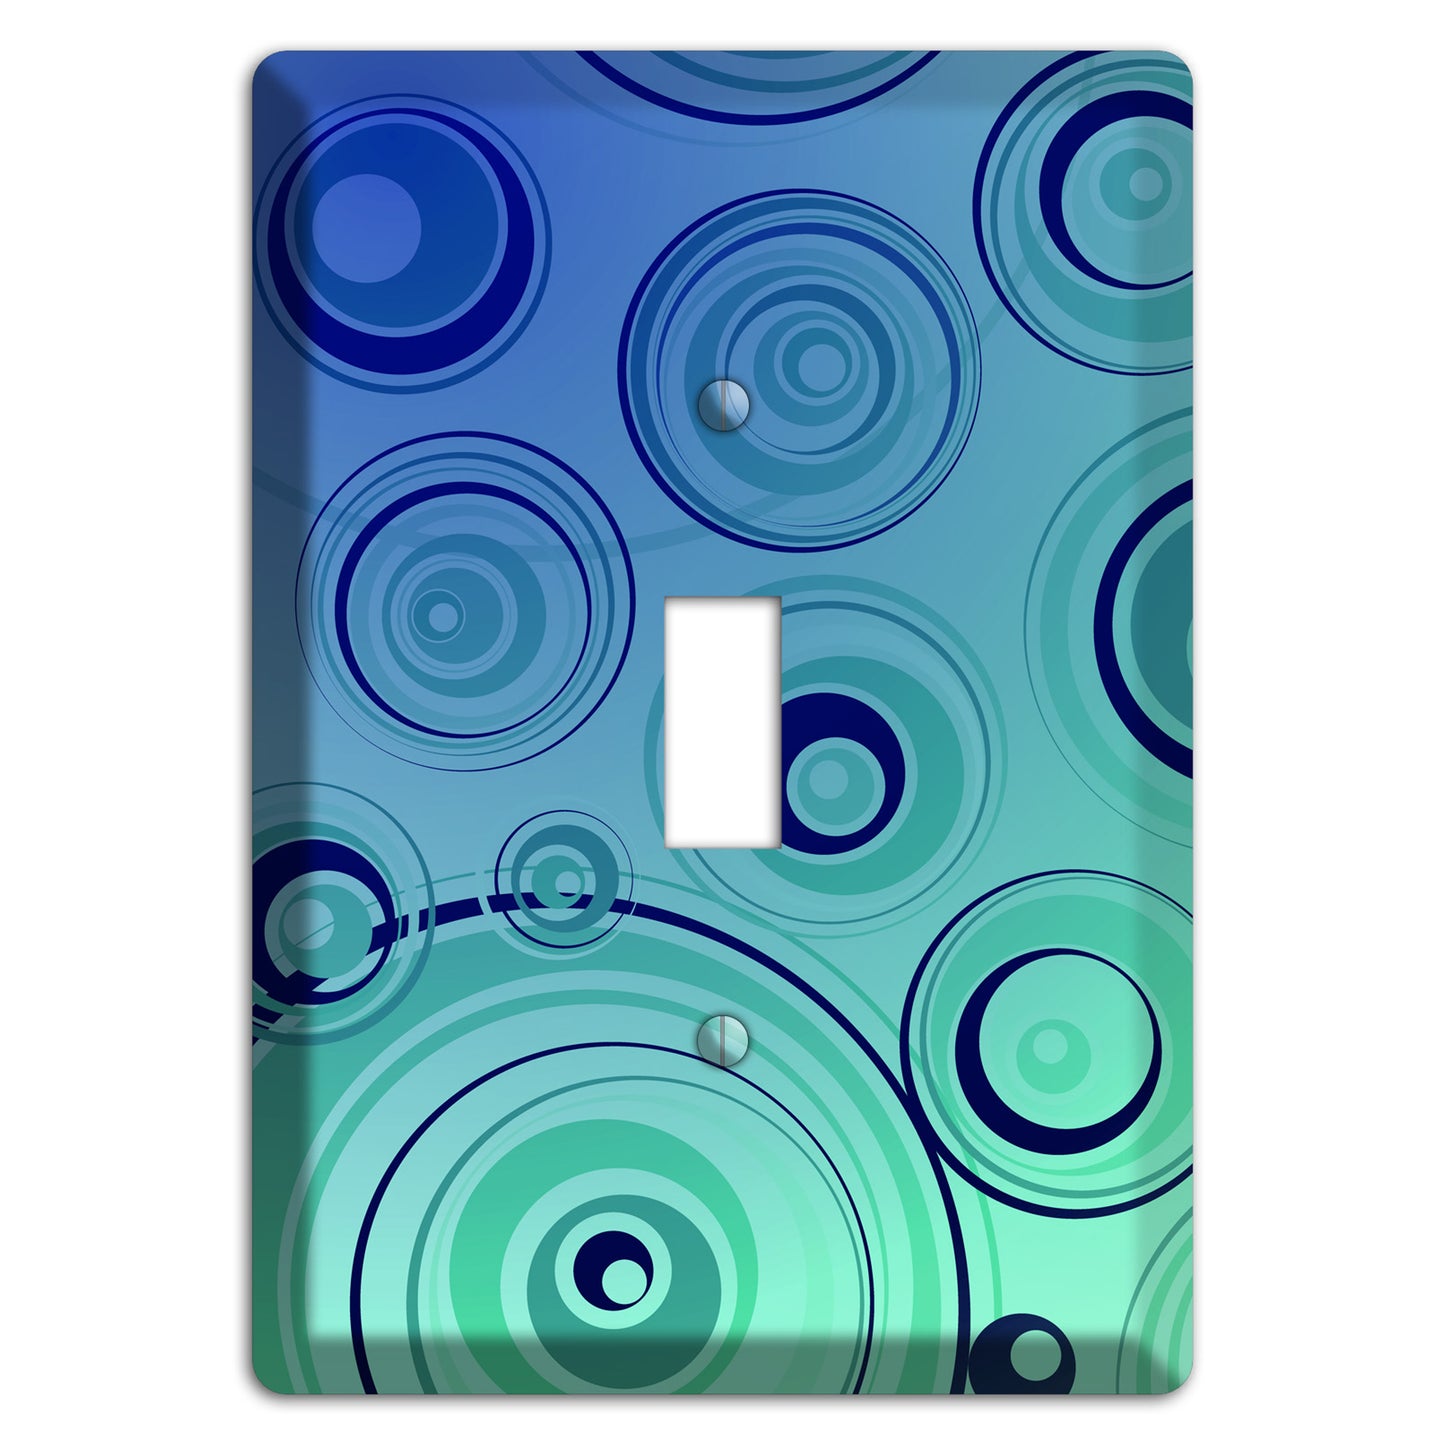 Blue and Green Circles Cover Plates